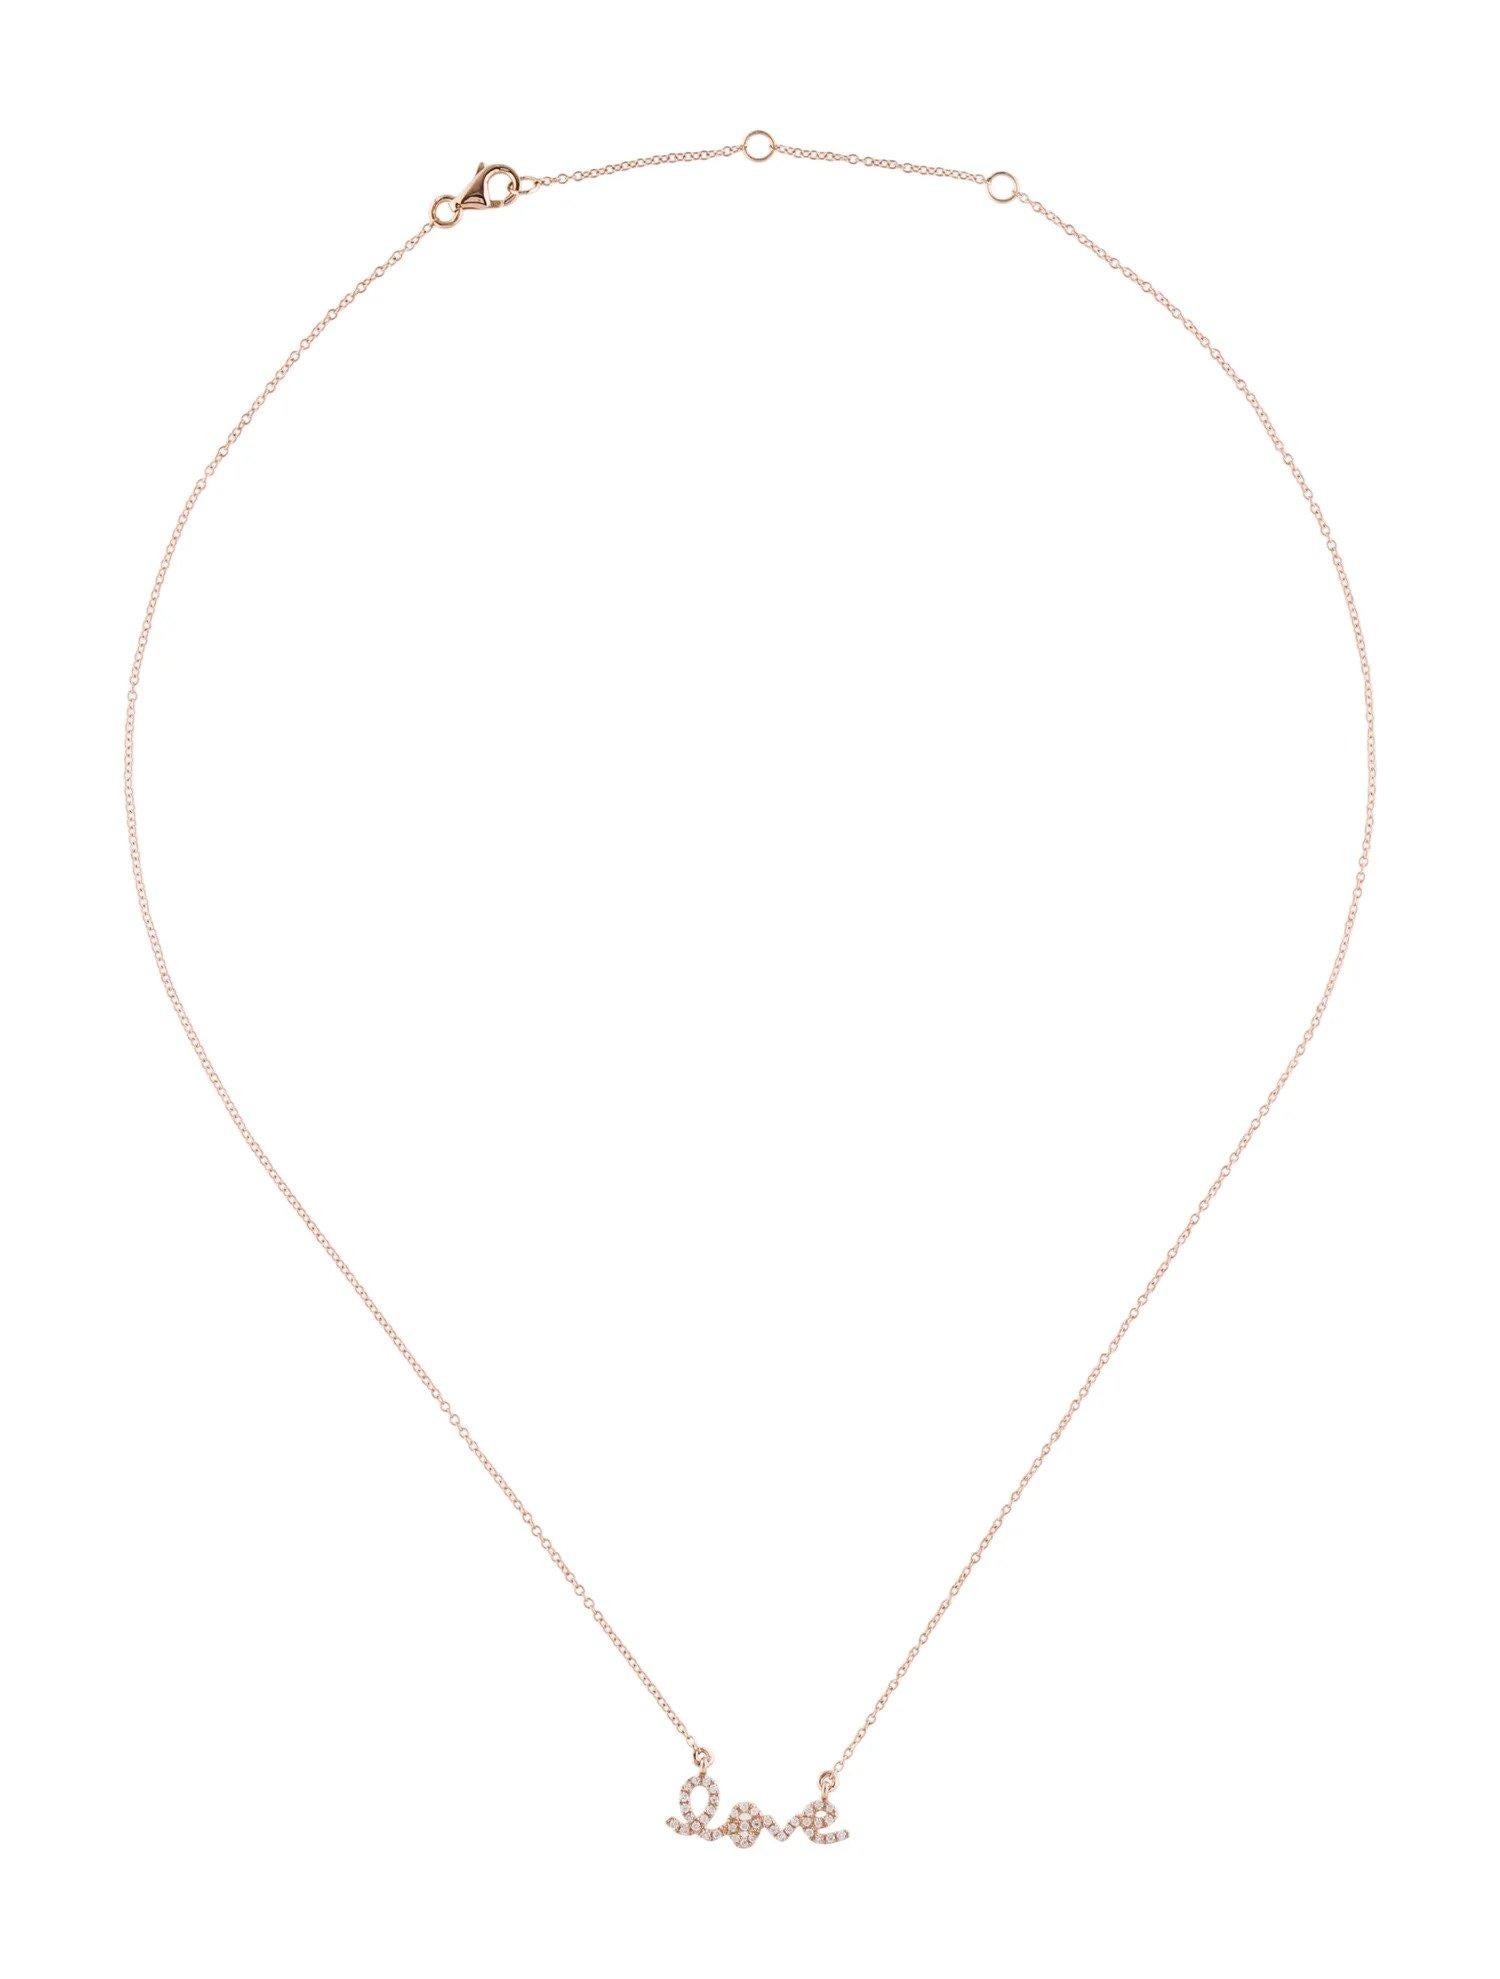 0.13 Carat Diamond Love Rose Gold Pendant Necklace In New Condition For Sale In Great Neck, NY